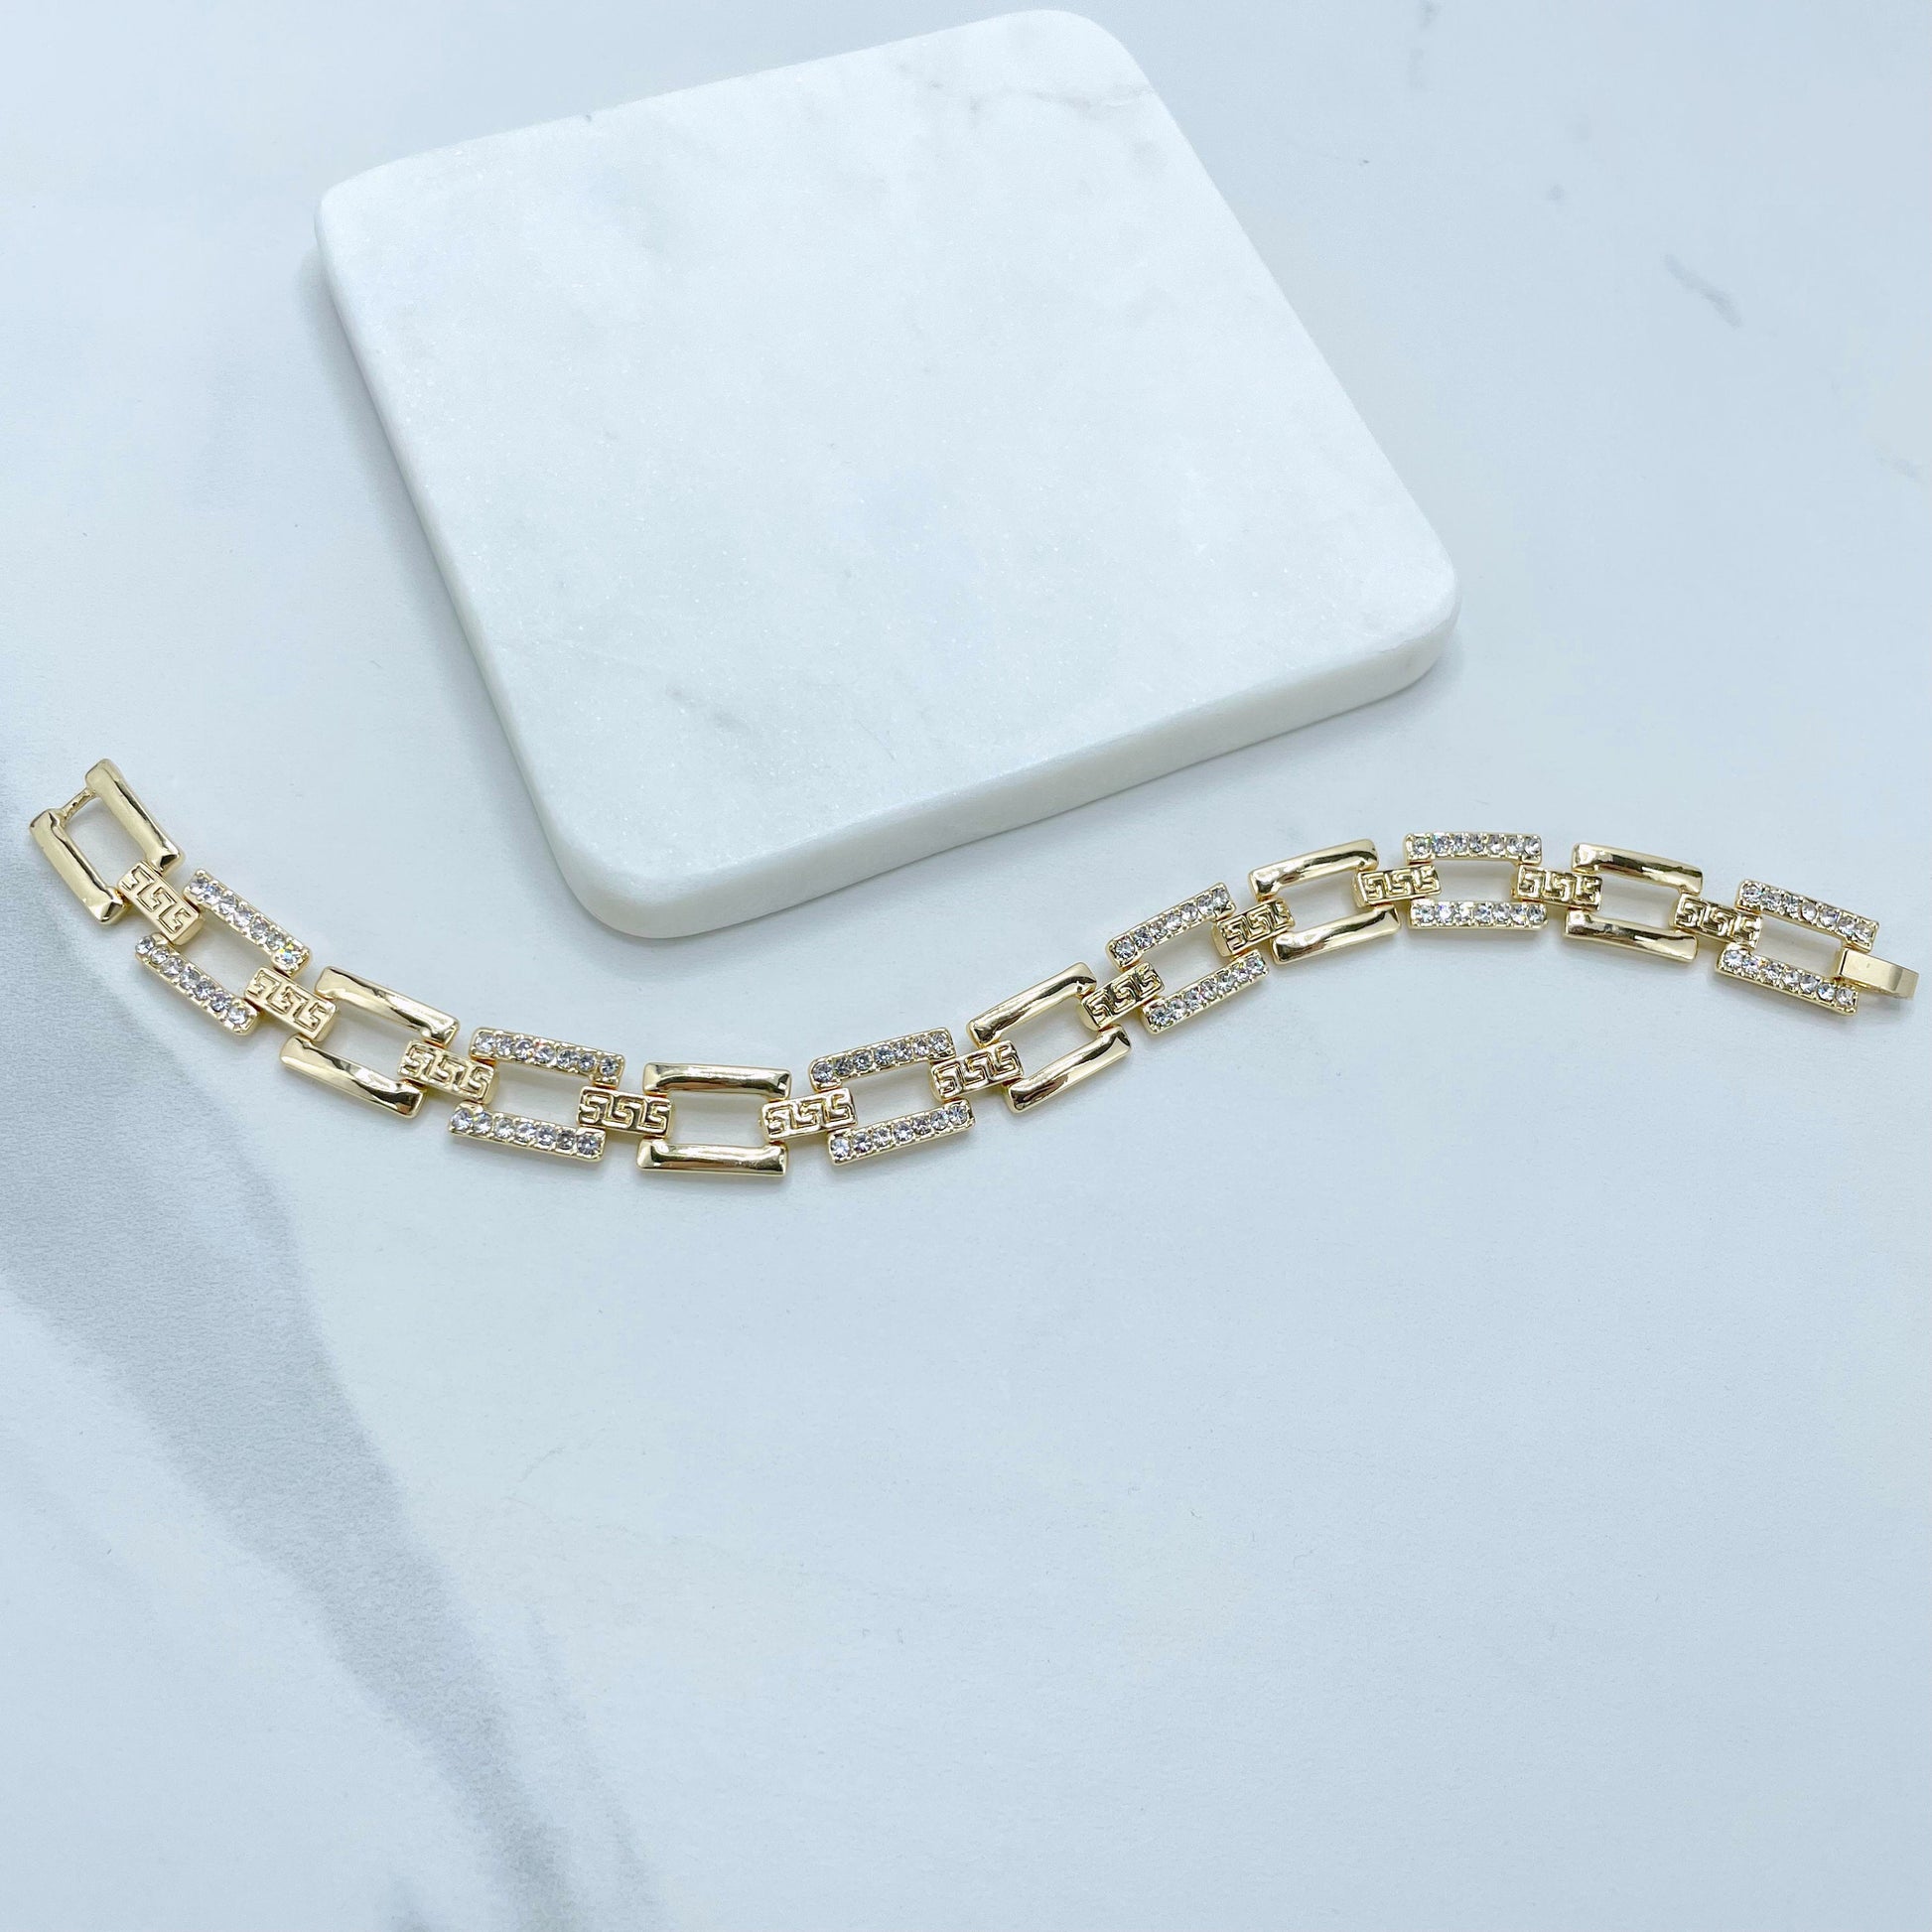 18k Gold Filled with Cubic Zirconia, Rectangular Linked Bracelet with Patterned Details, Wholesale Jewelry Making Supplies